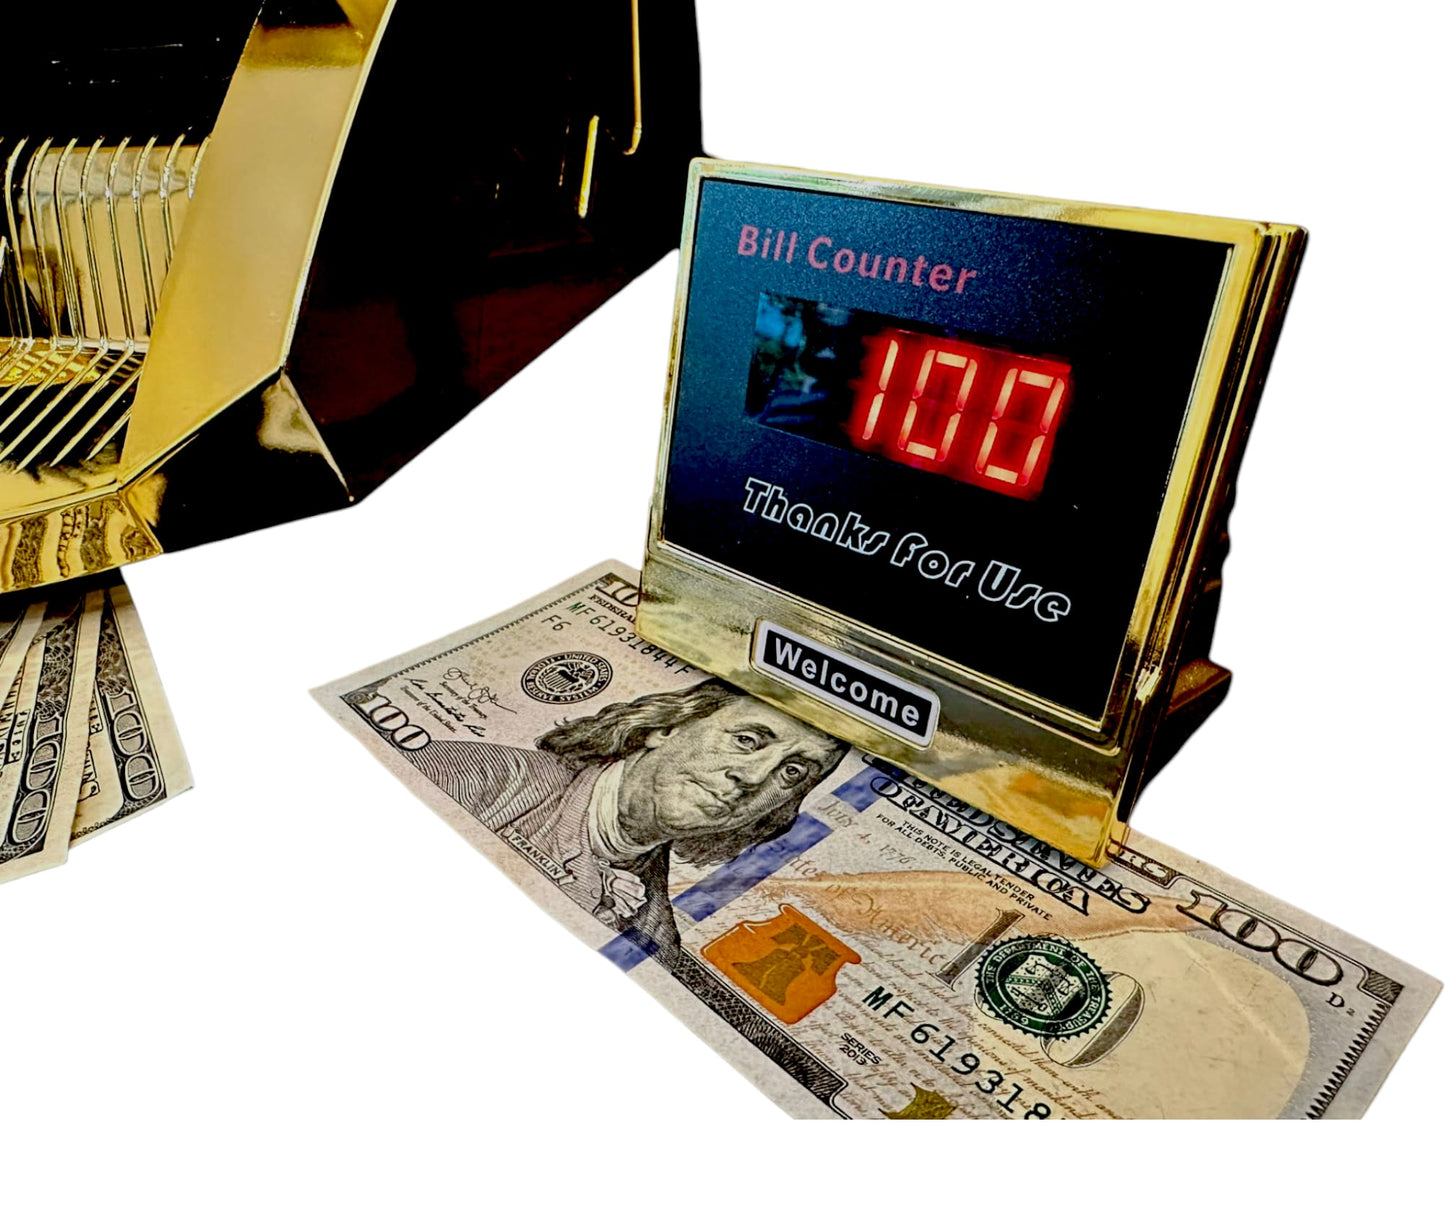 Upromax Gold Money Counter Machine UV/MG/IR Money Counterfeit Detector & Bill Portable w/ LED External Display - Fast Speed 1000 Bills a Minute - Multi-currencies Cash Banknote Bill Counter